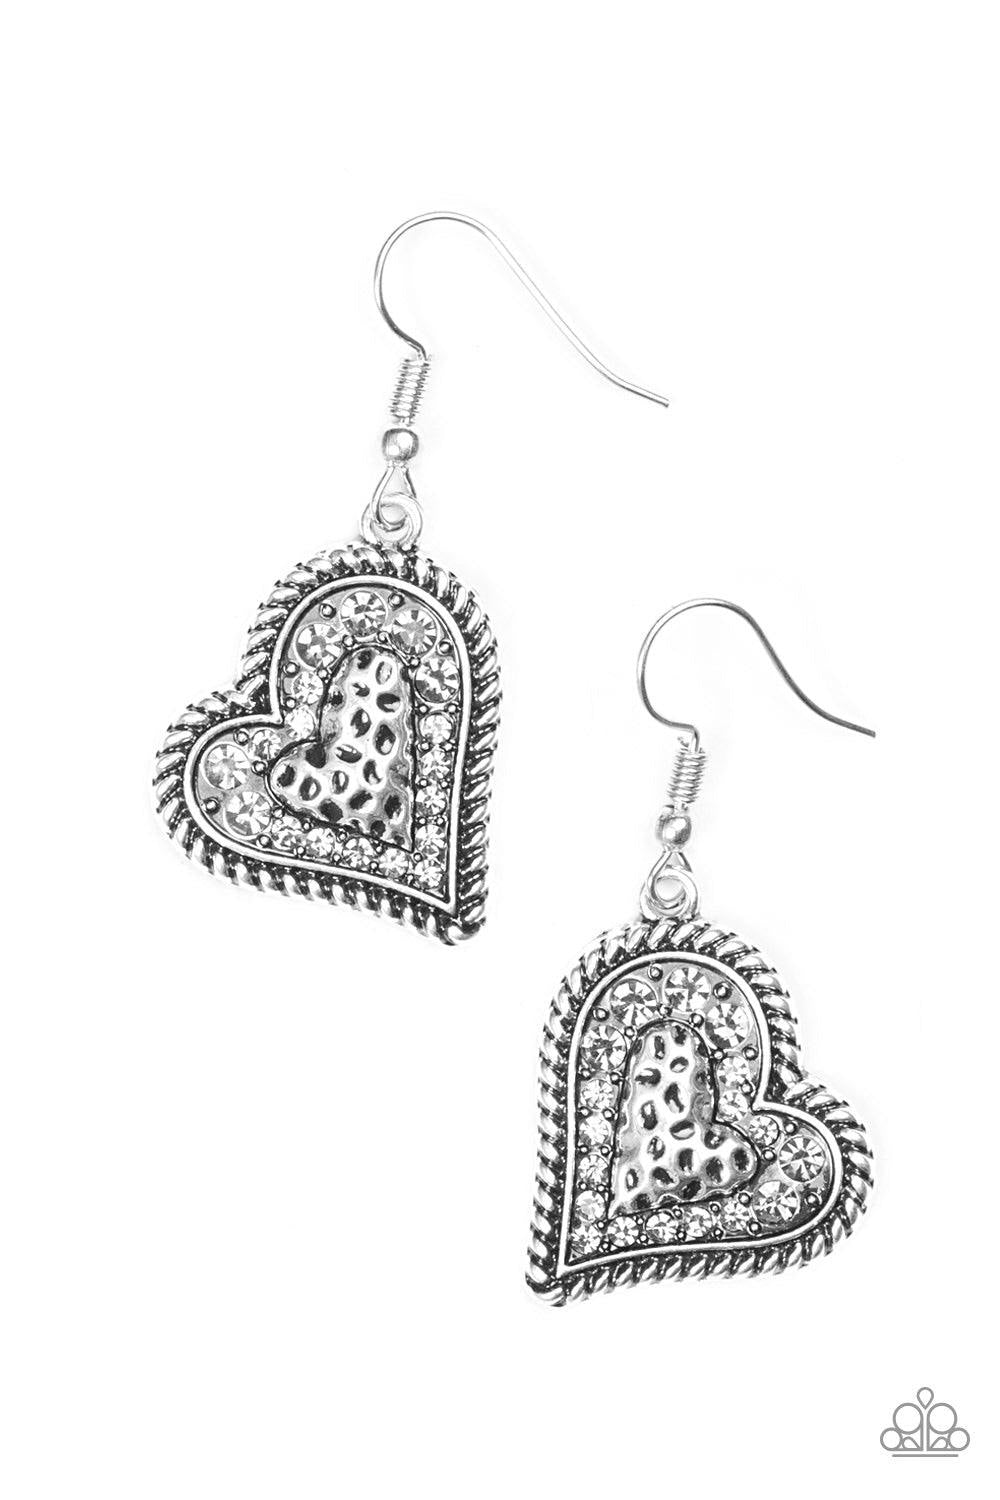 Paparazzi Accessories True Love - Silver Encrusted in smoky rhinestones, the center of a heart shaped frame is embossed in a textured heart for a flirty finish. Earring attaches to a standard fishhook fitting. Jewelry